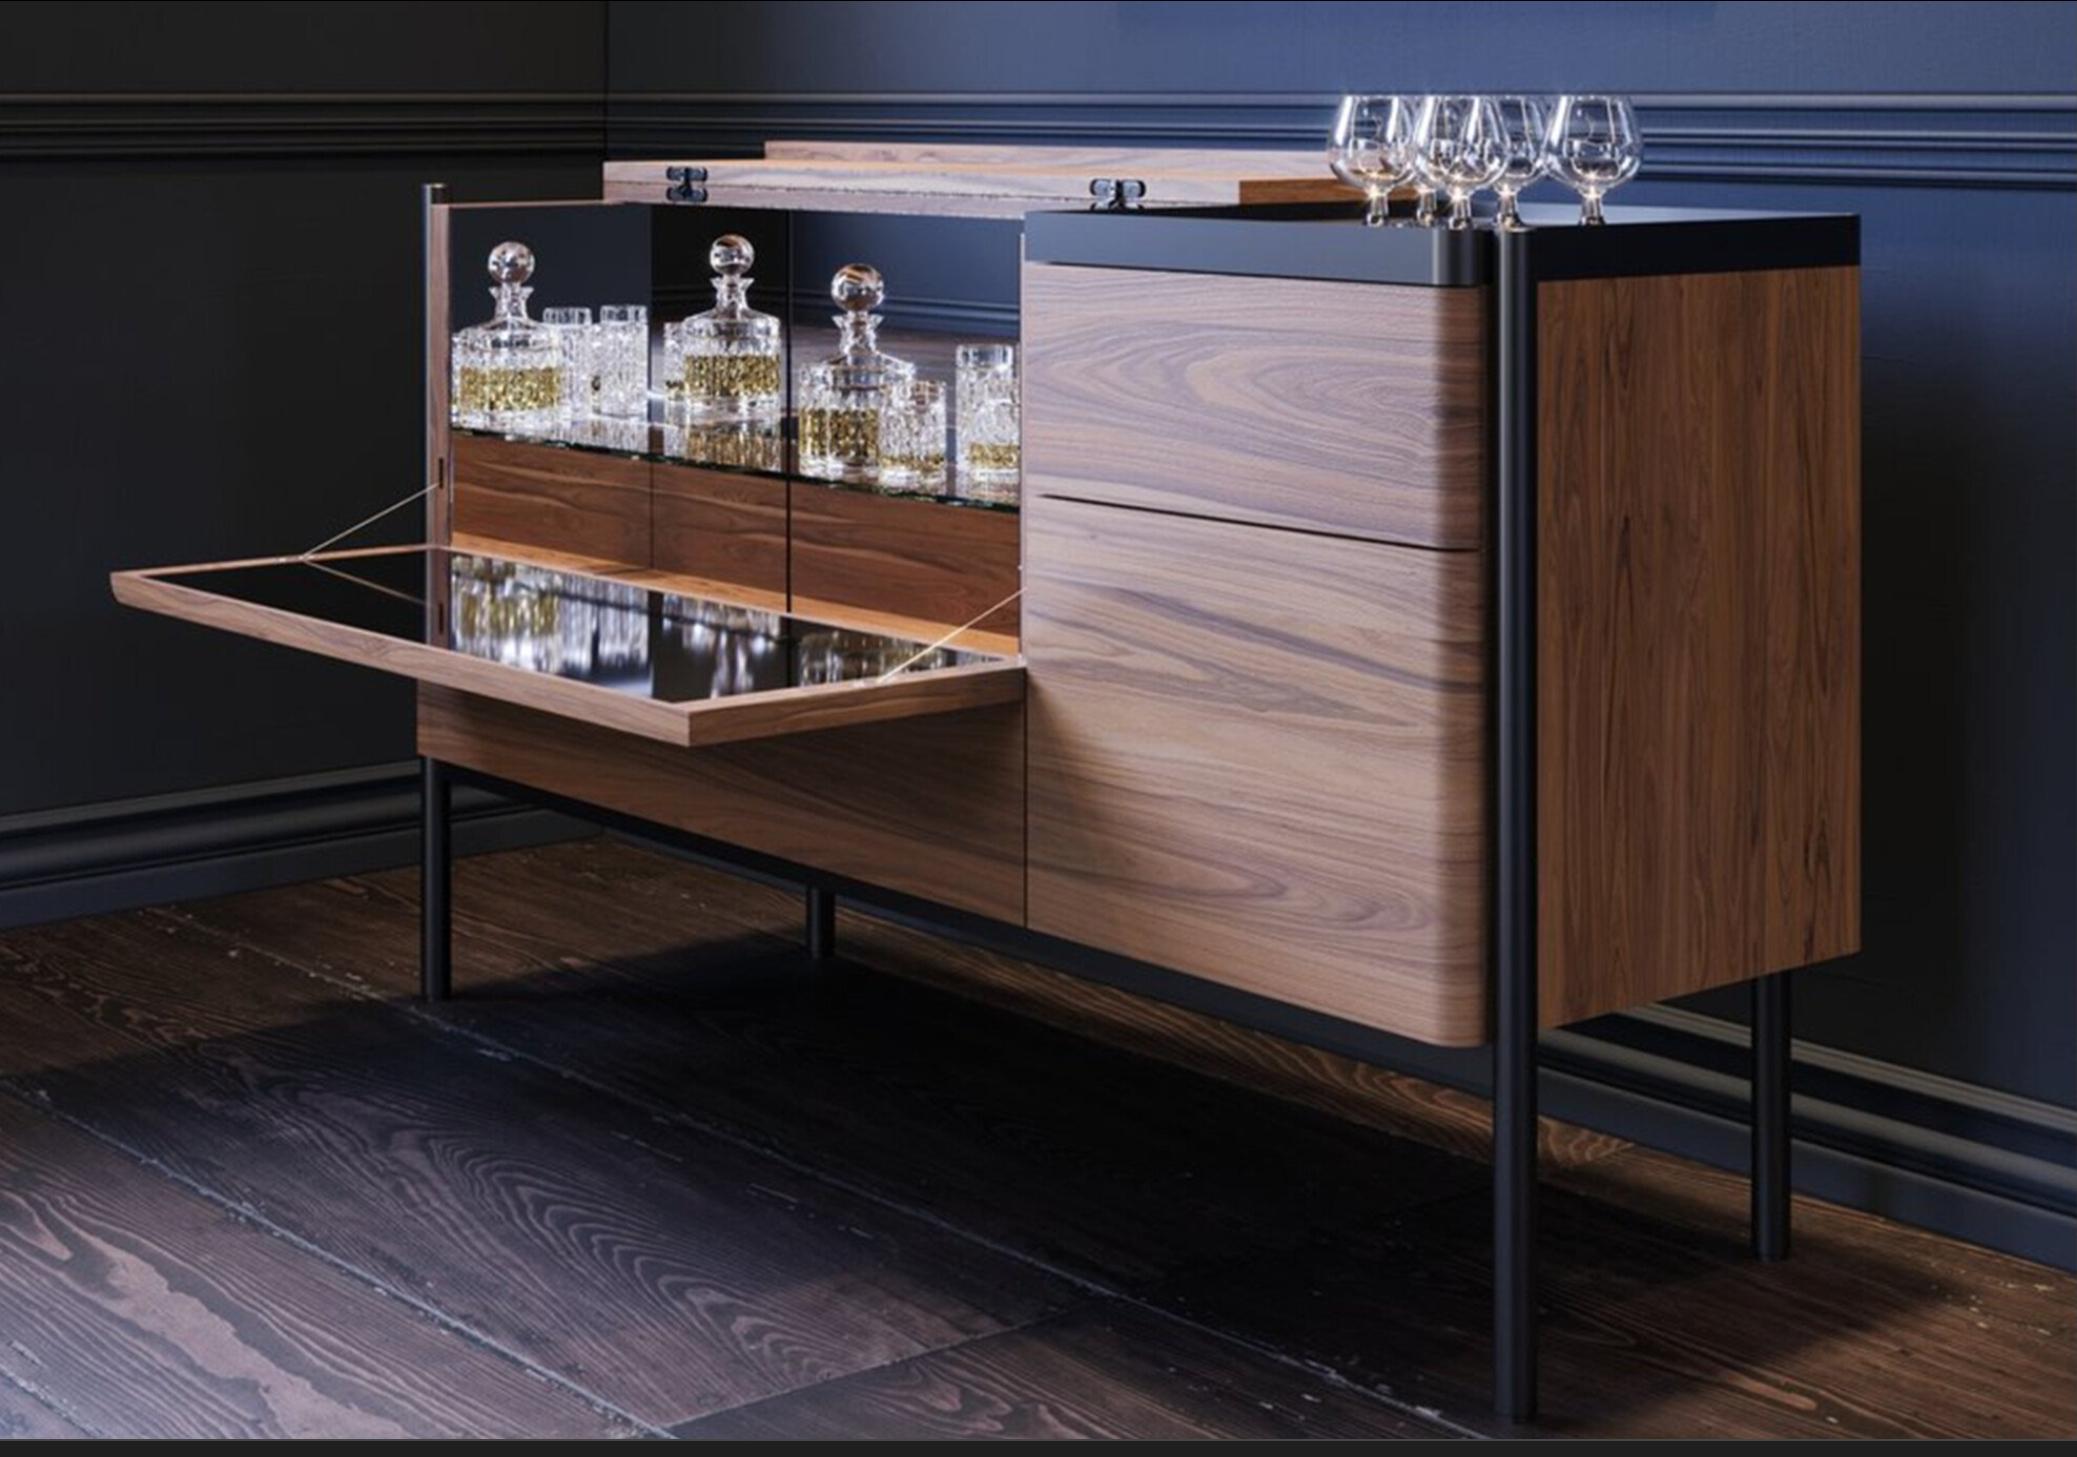 This extremely elegant solid high quality Walnut wood Dry Bar Sideboard is the combination of a traditional sideboard with a sophisticated drinks cabinet.
The design was inspired by ancient jewellery boxes: simple, neat containers of precious and